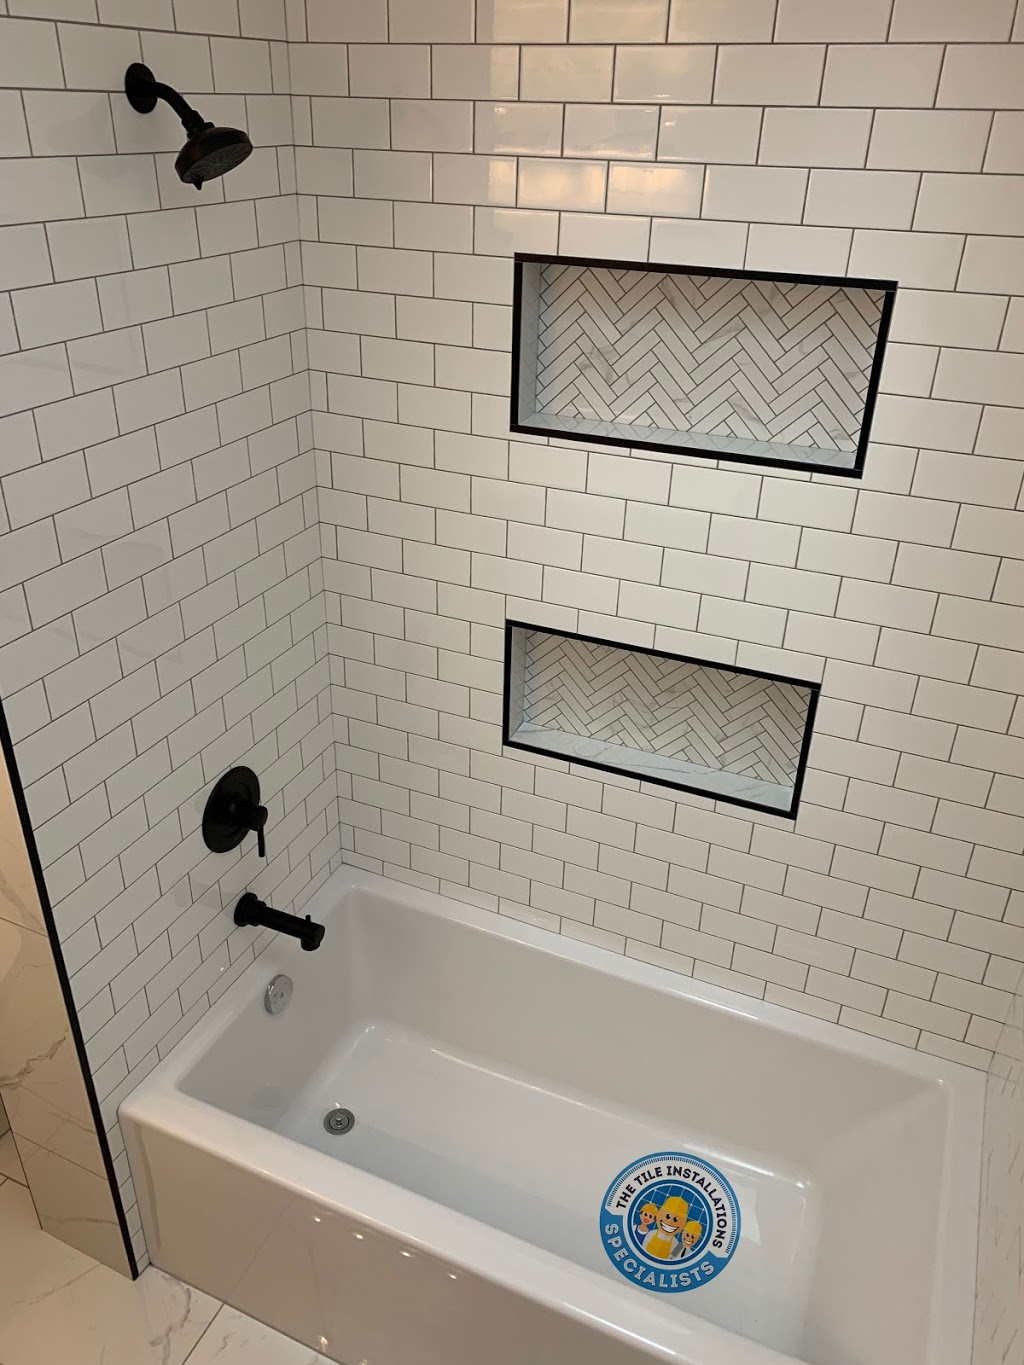 The Tile Installations Specialists | 5119 167 Ave NW, Edmonton, AB T5Y 0L0, Canada | Phone: (780) 953-2253